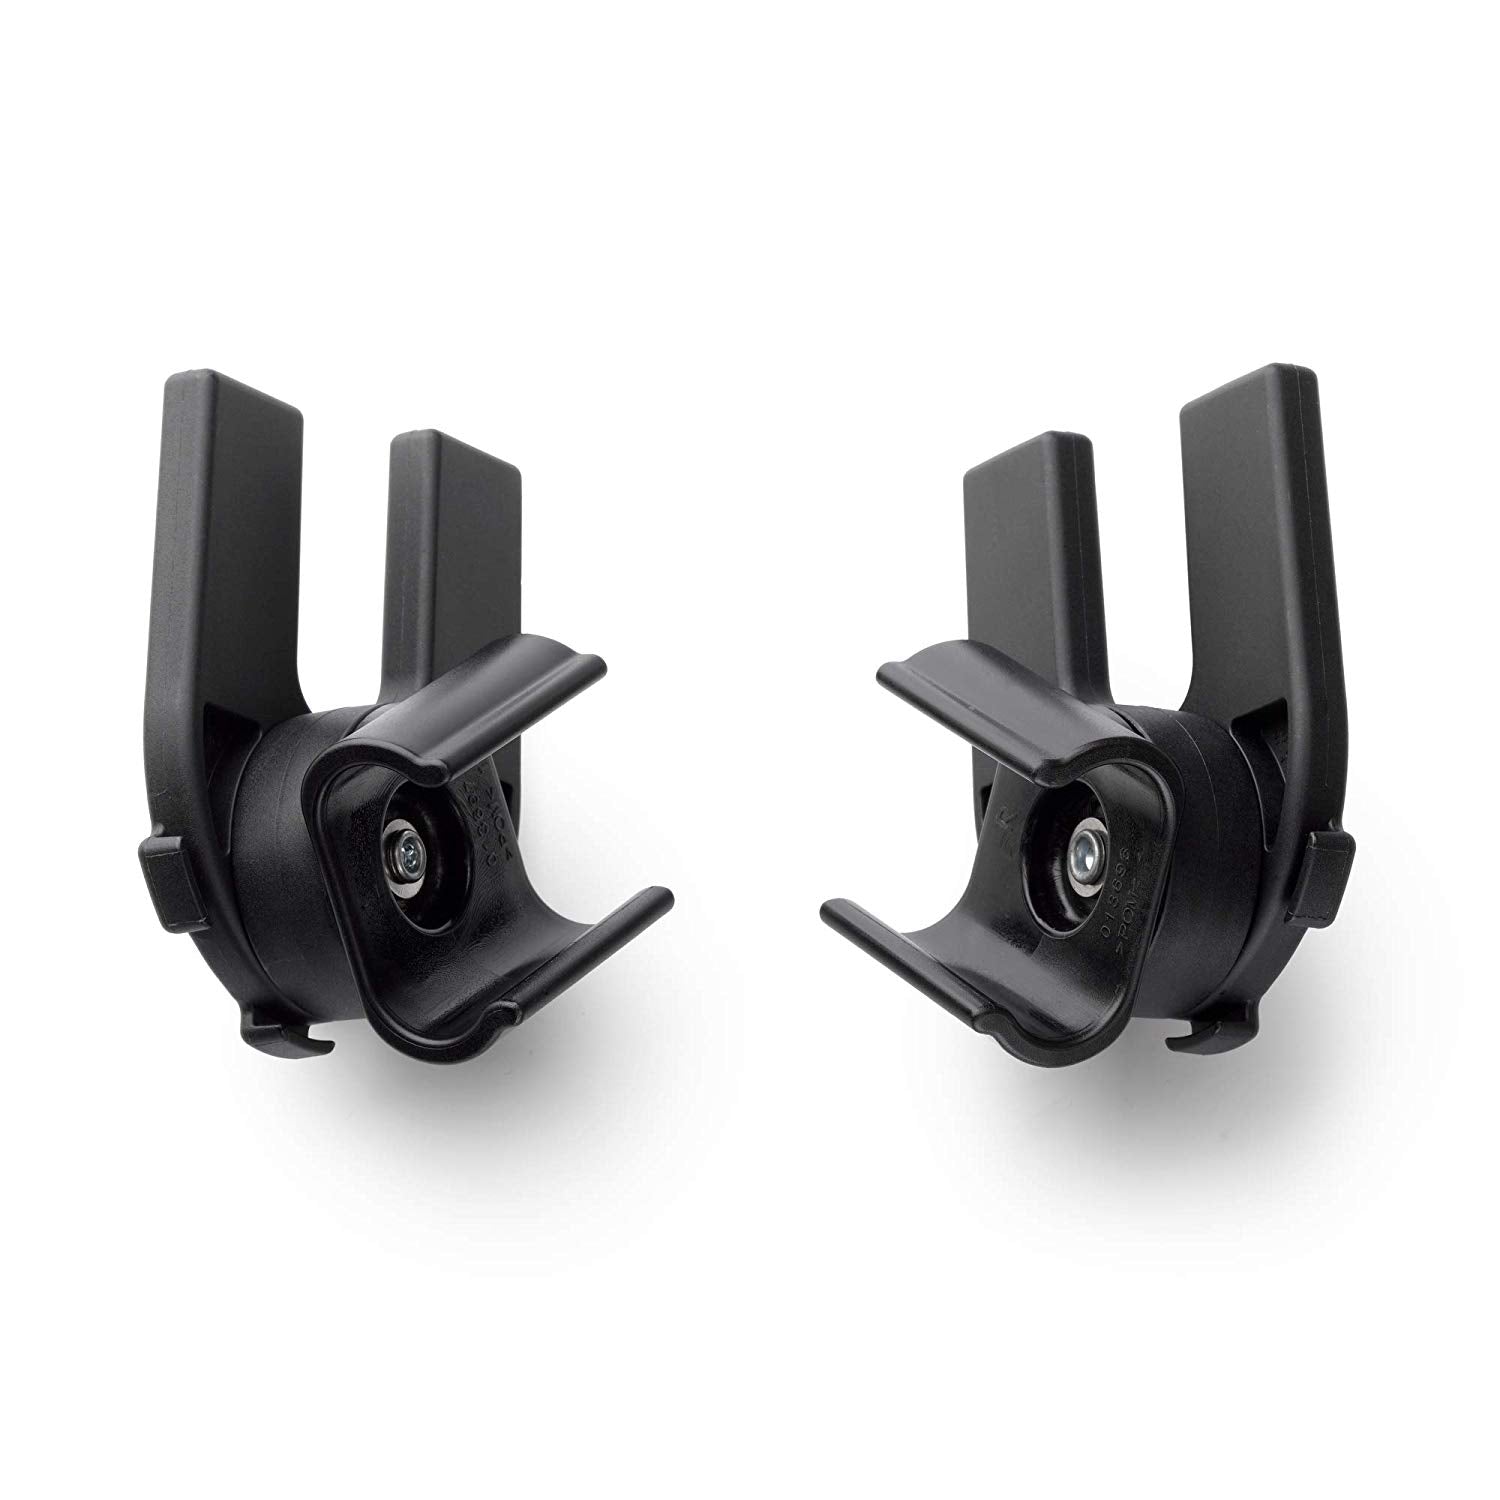 BUGABOO Cameleon 3 Sun Canopy Clamps Replacement Set - BLACK.